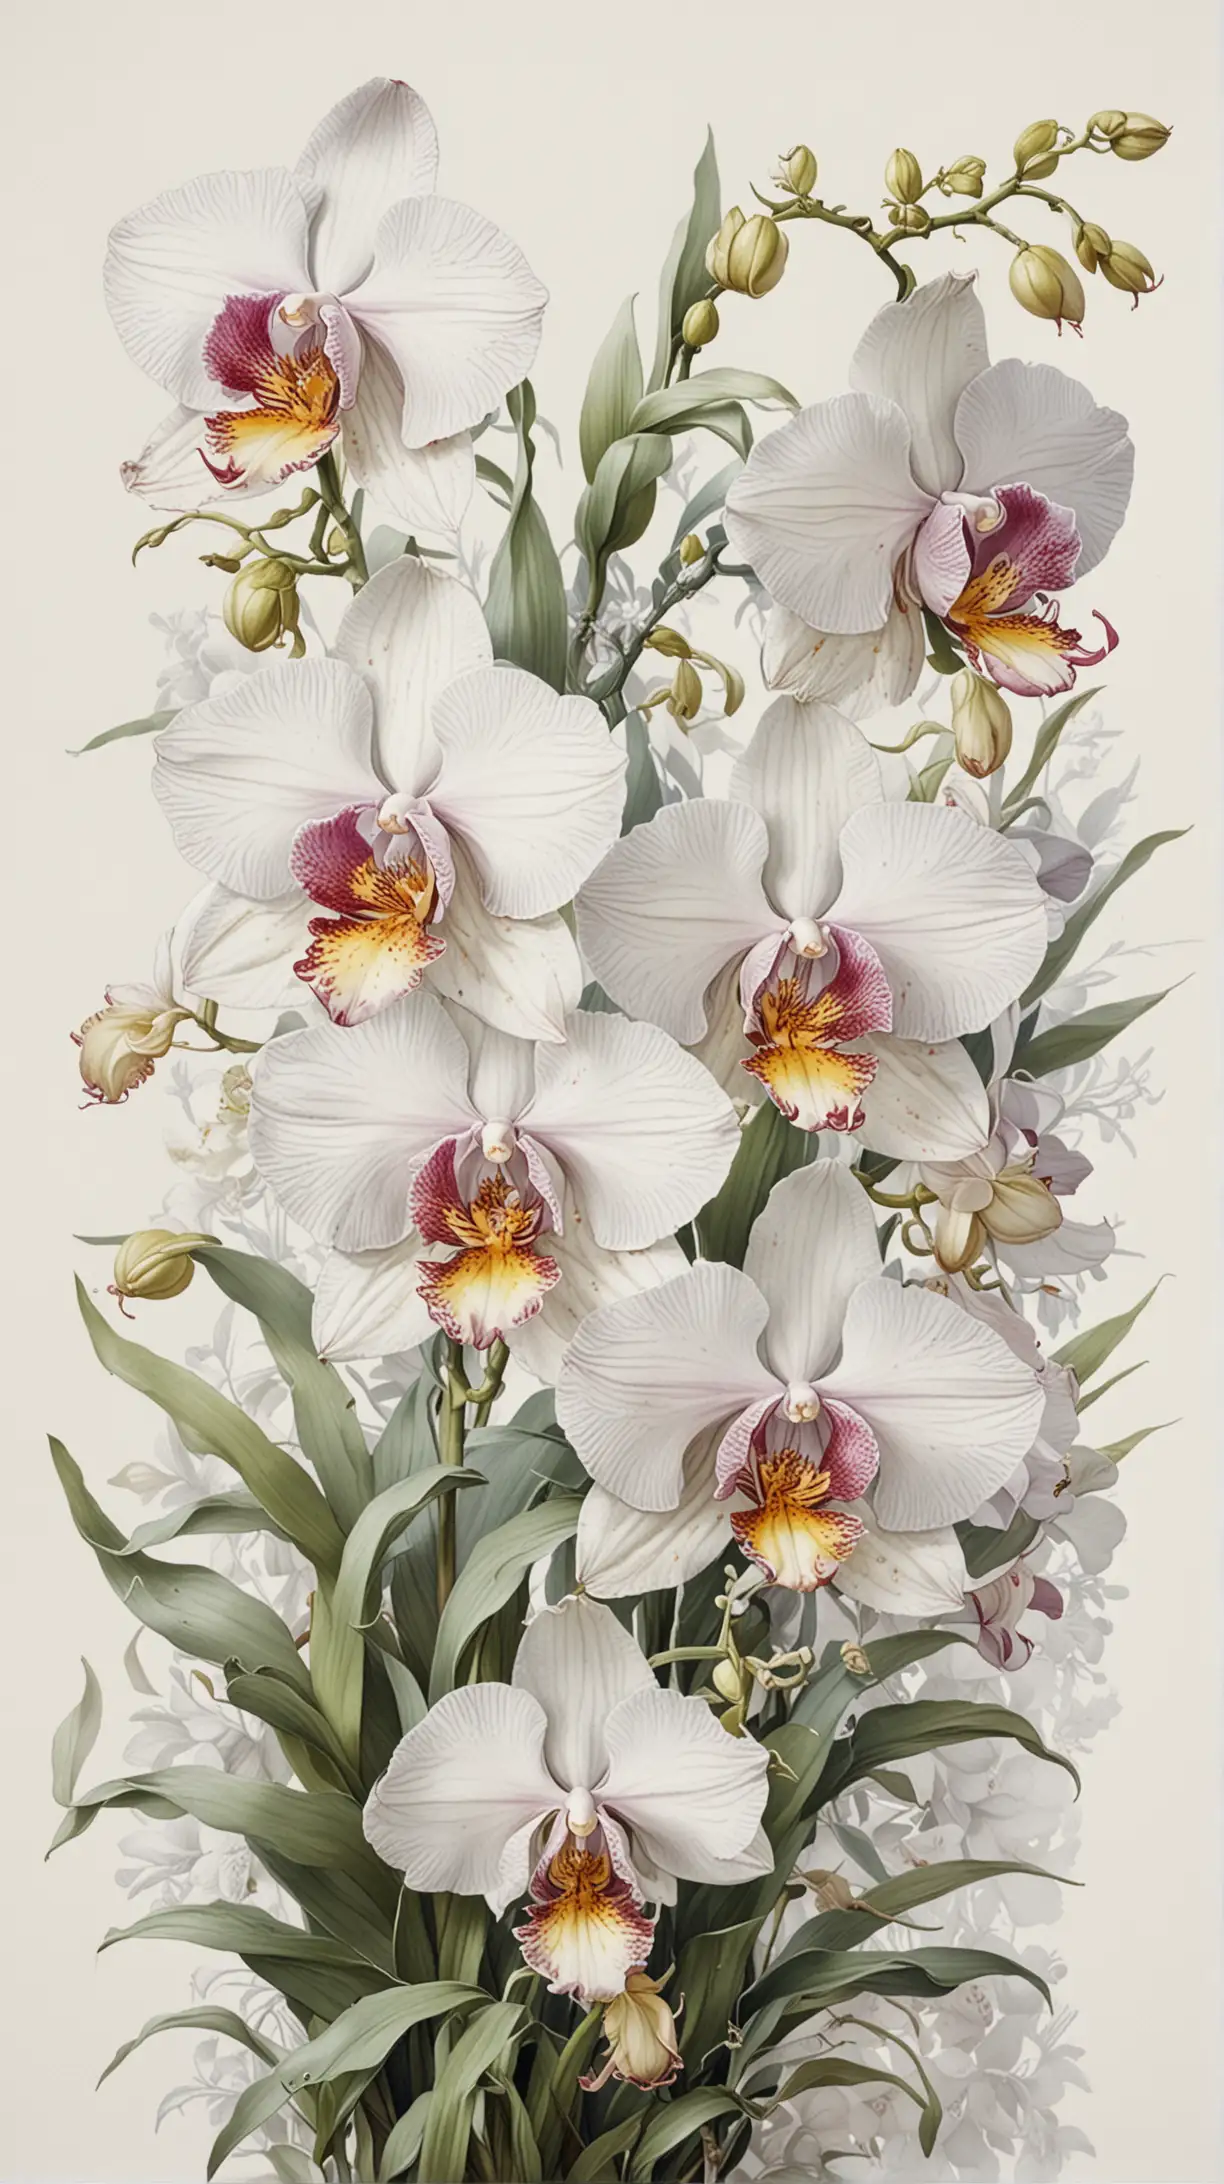 Snow White Lush Orchids Border Design Watercolor Painting